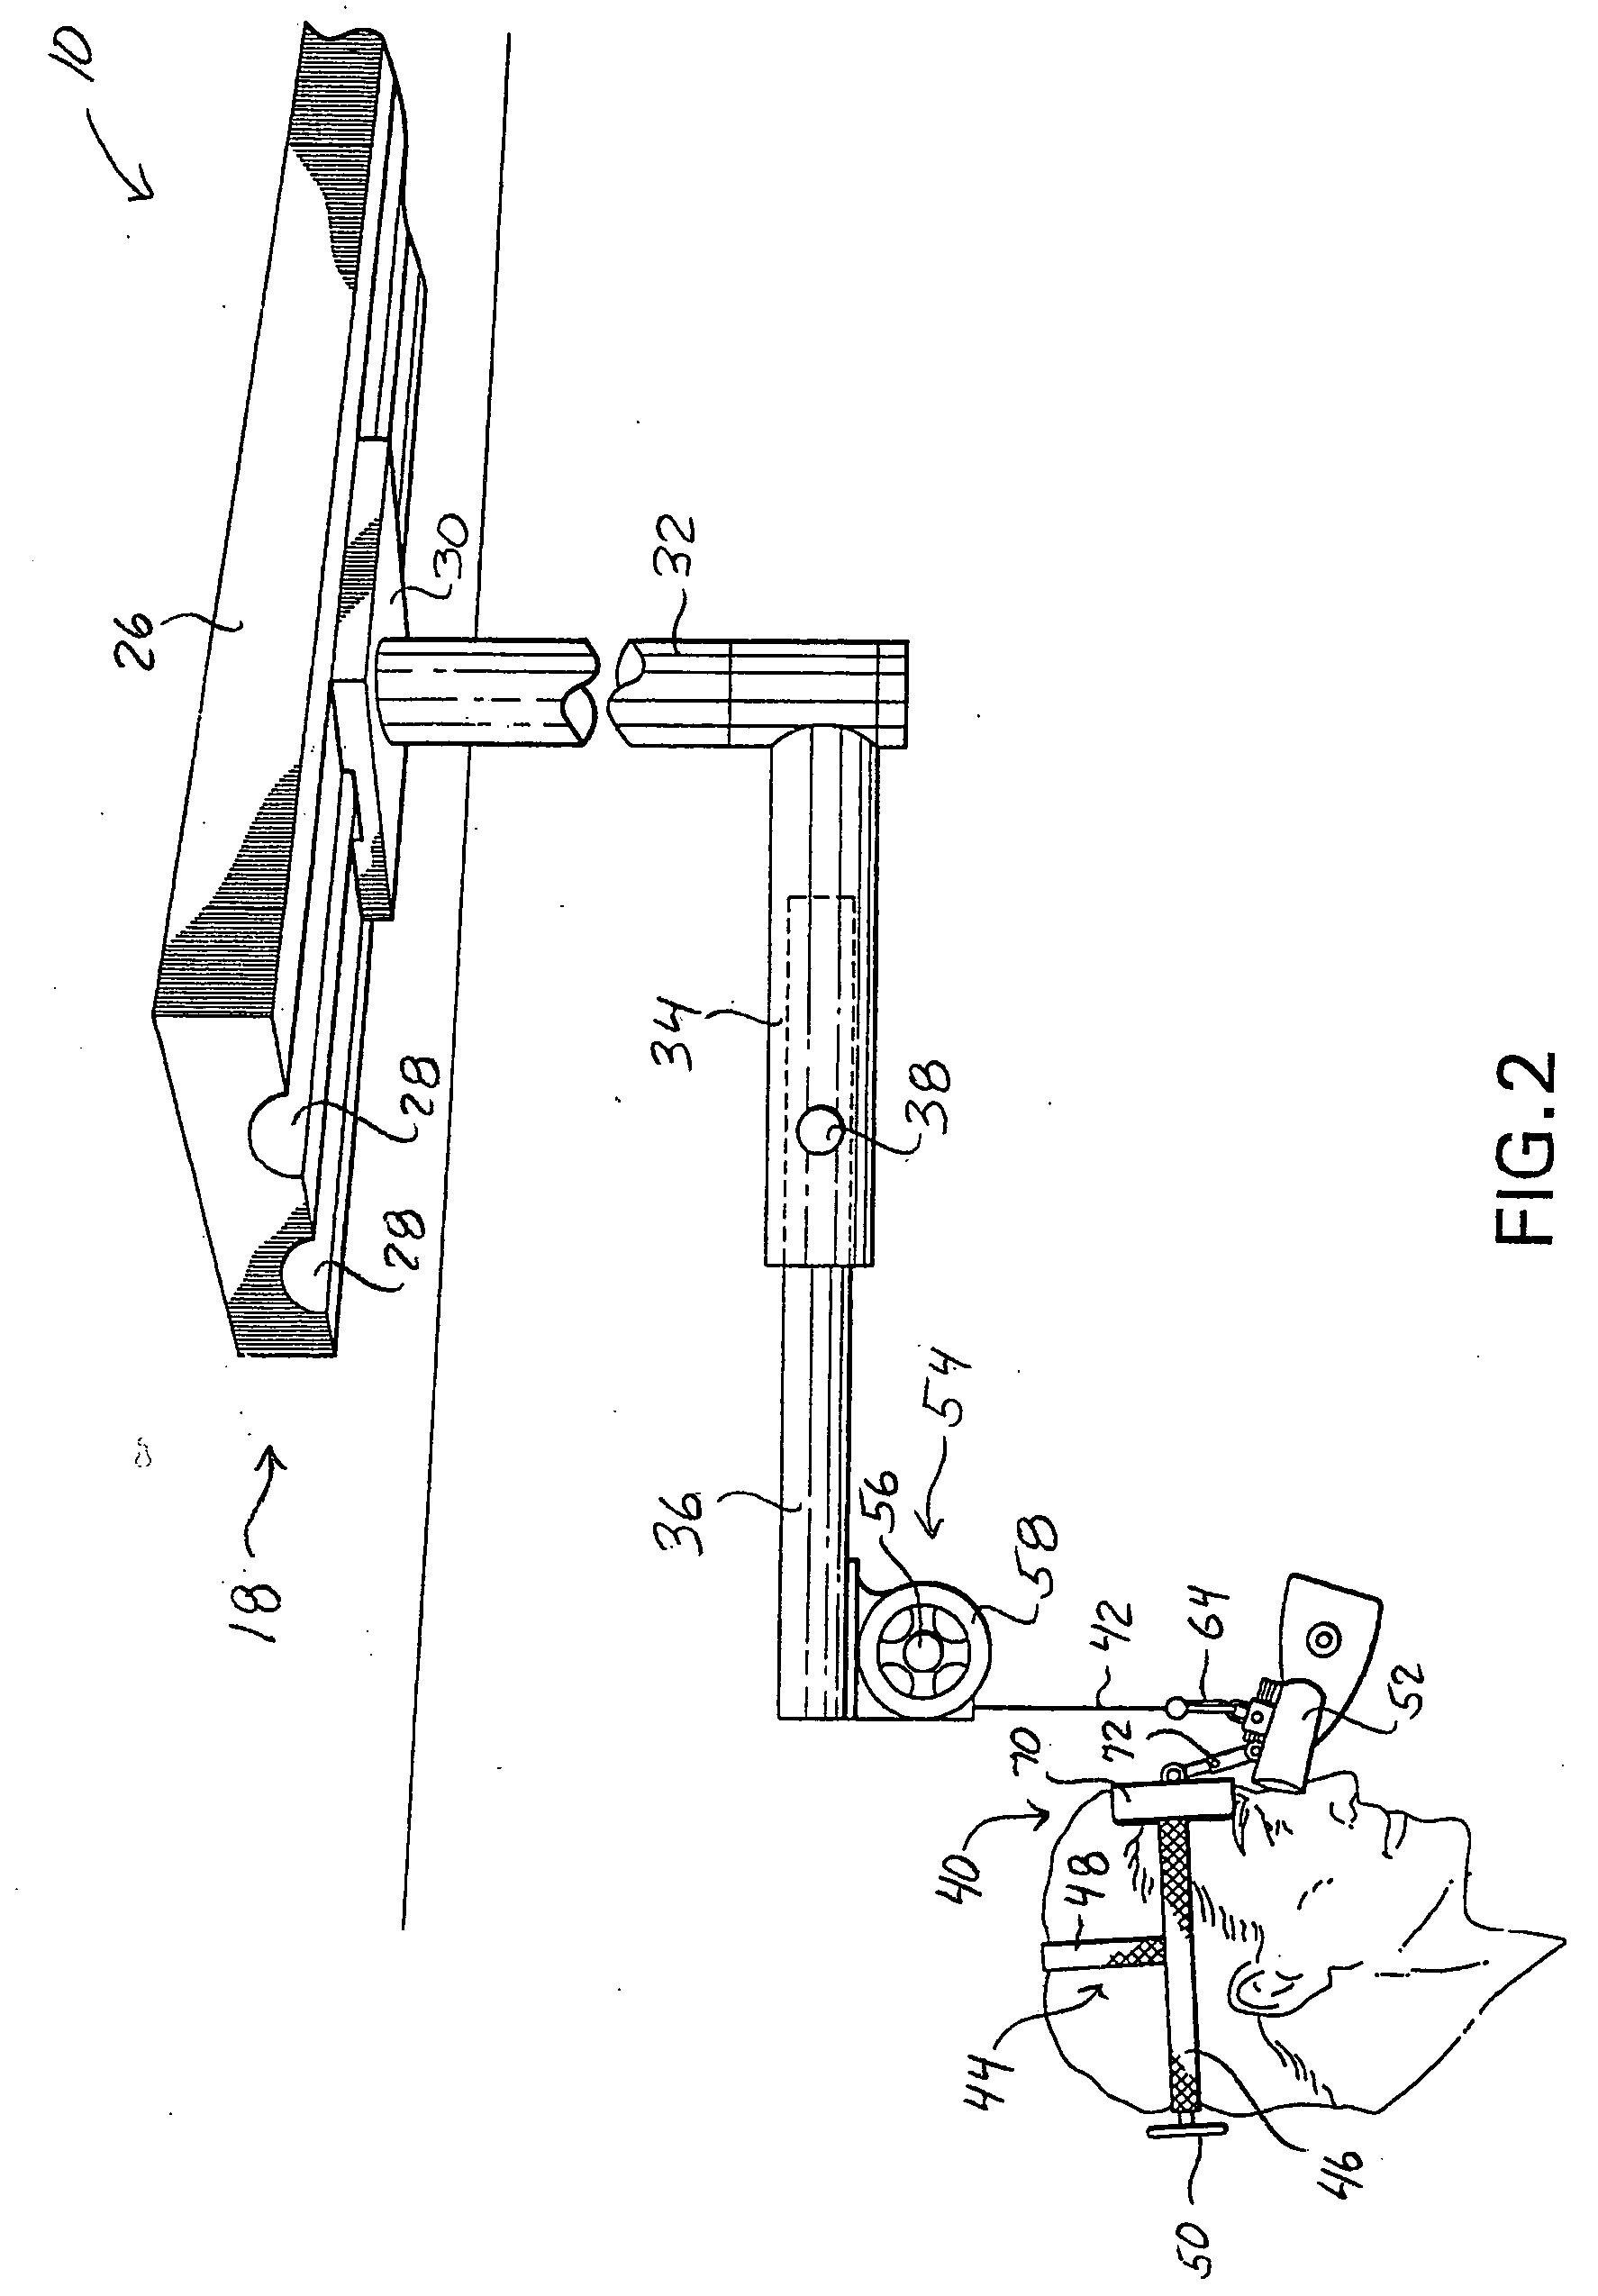 Surgical microscope support system